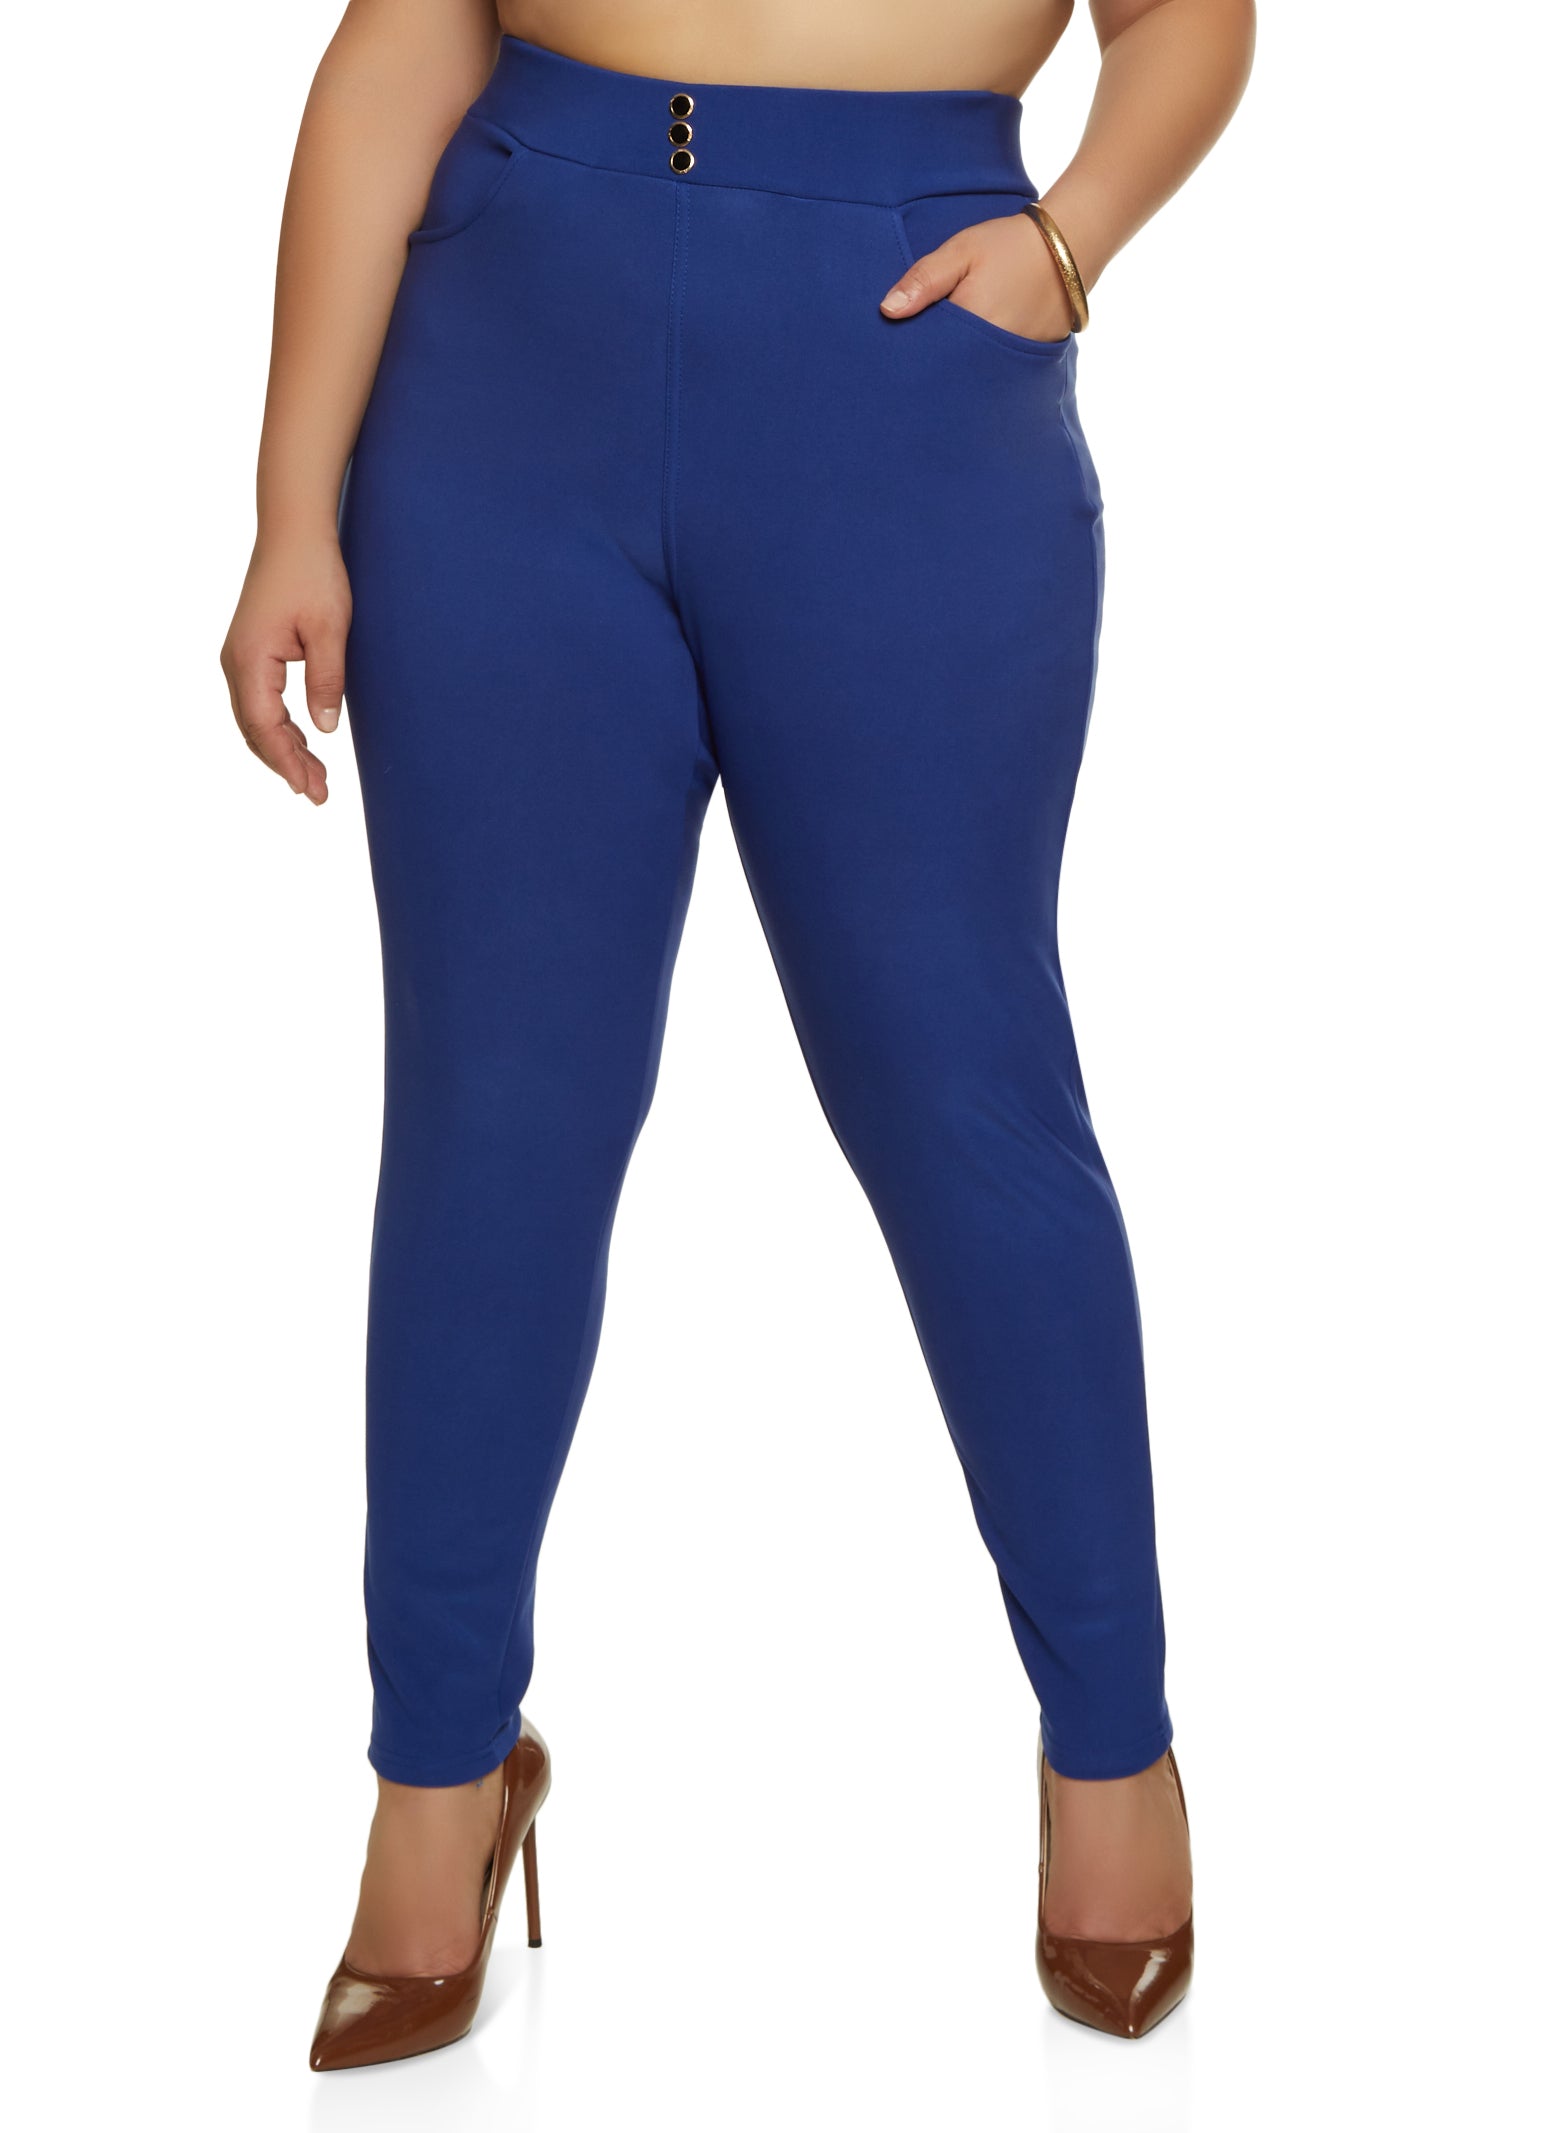 Flaunt Your Curves in Navy Plus Size High Waist Leggings - Shop